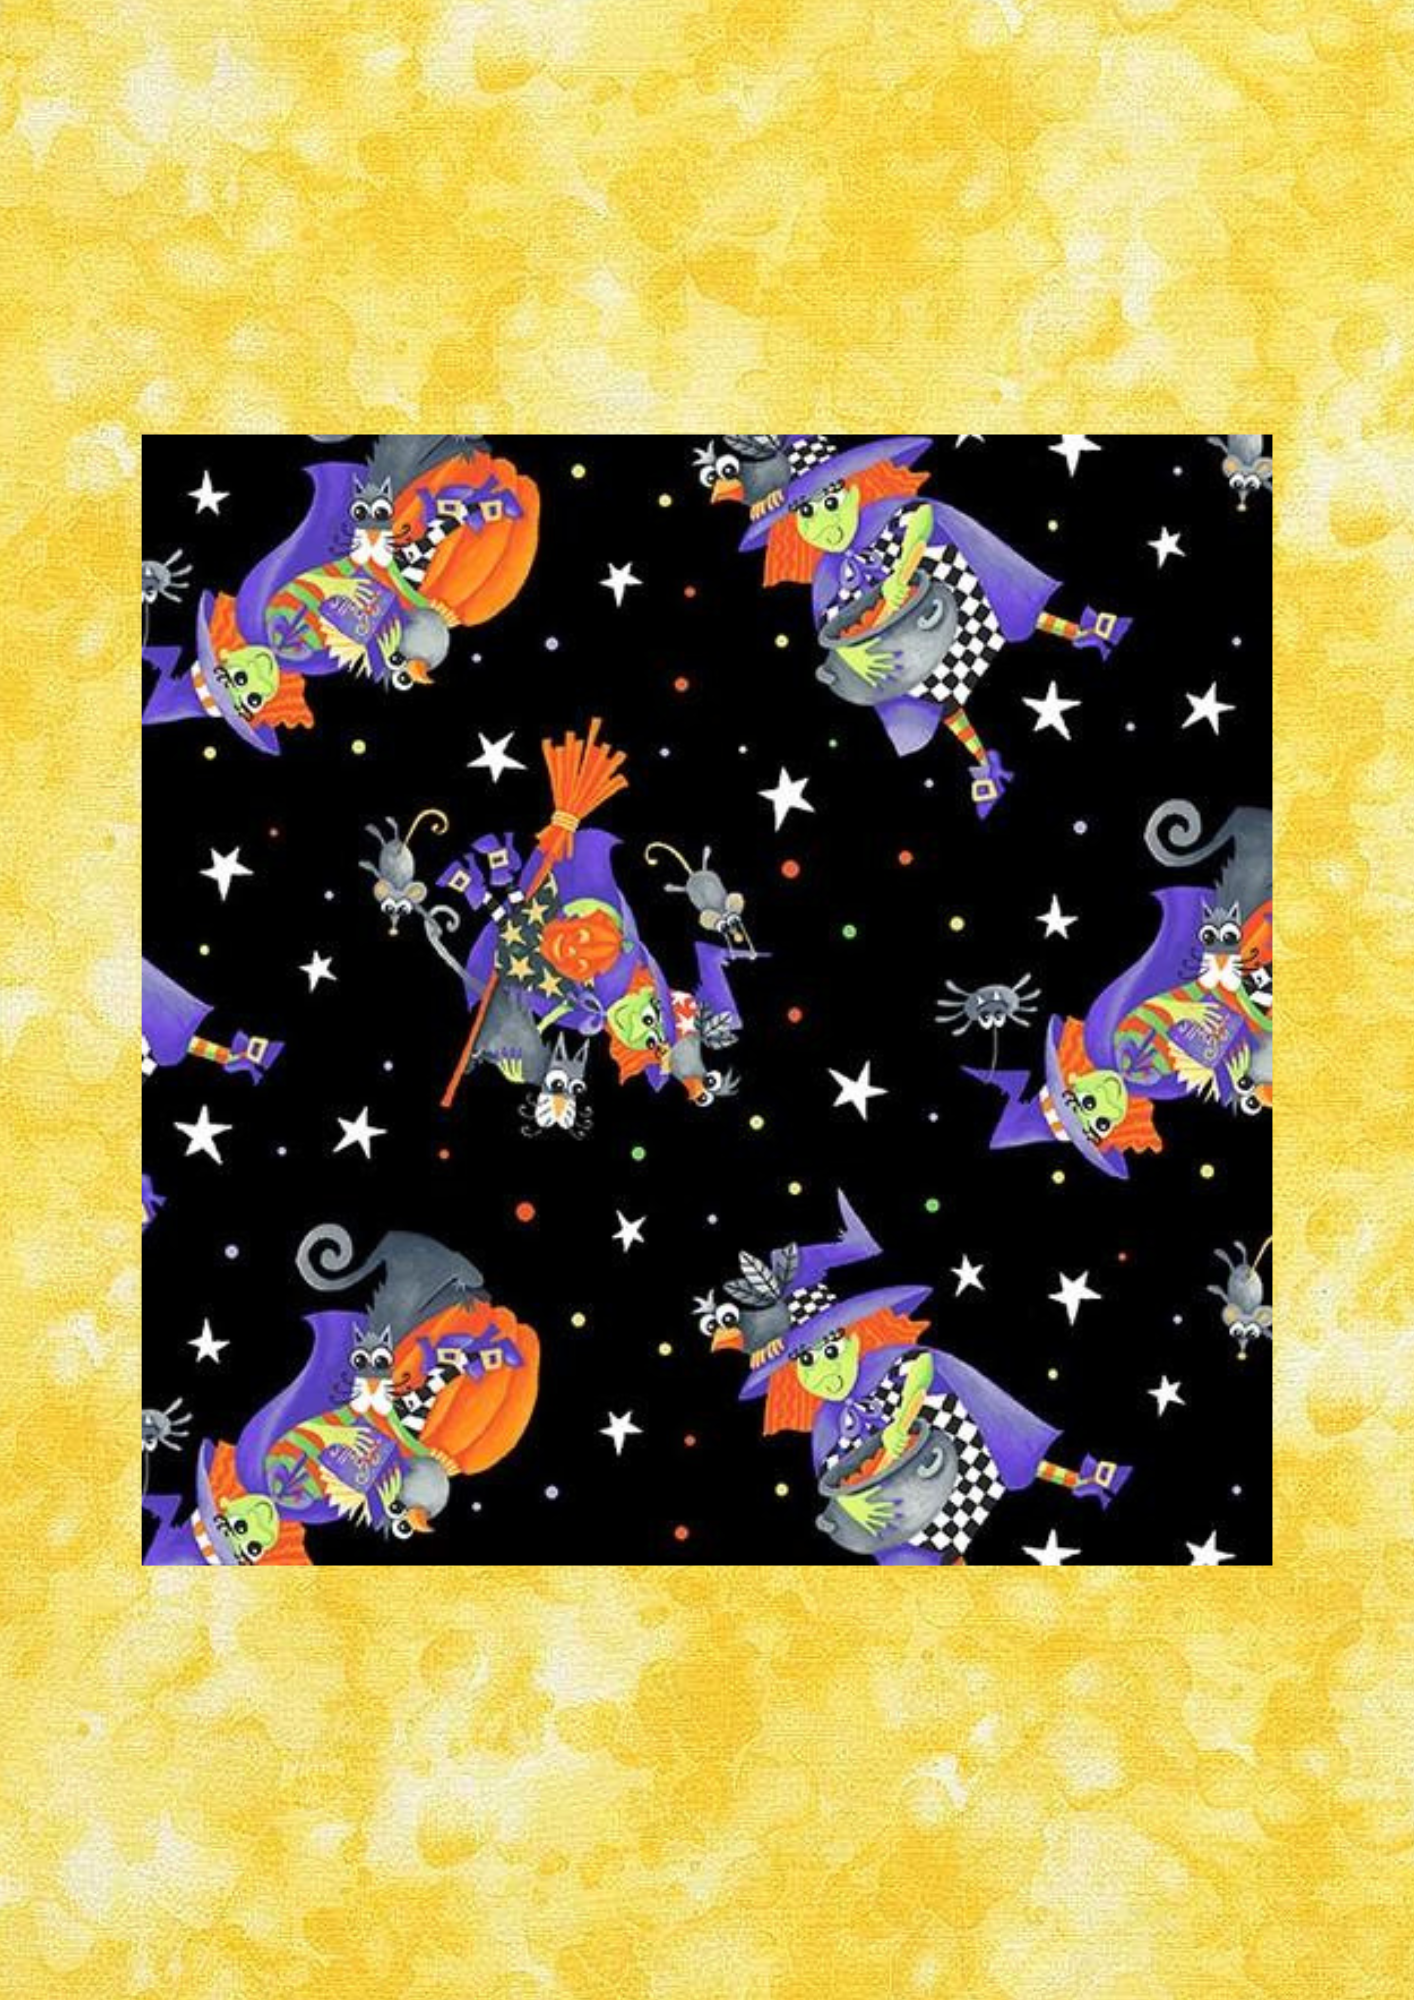 Angels Neverland Quilt Kit Halloween Quilt Kit featuring Northcott Gnomes Night Out Cotton Fabric Border with traditional Halloween Motifs